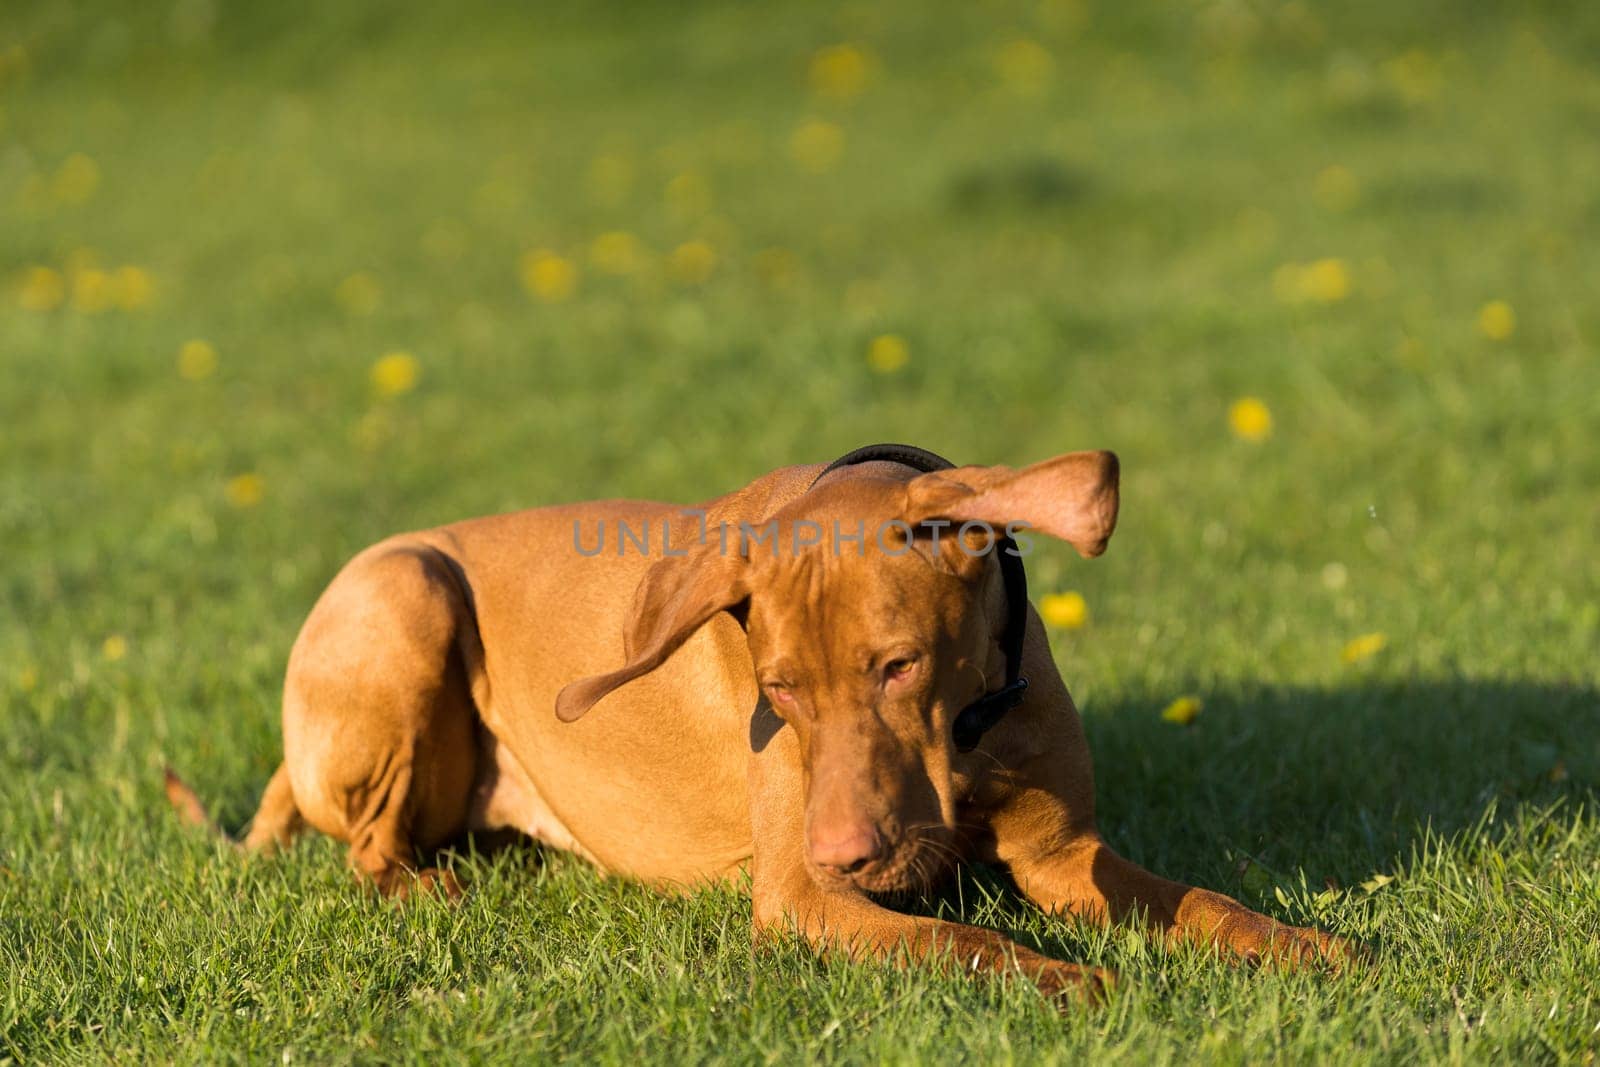 The Hungarian pointer lies on a green meadow and catches treats thrown by the trainer.